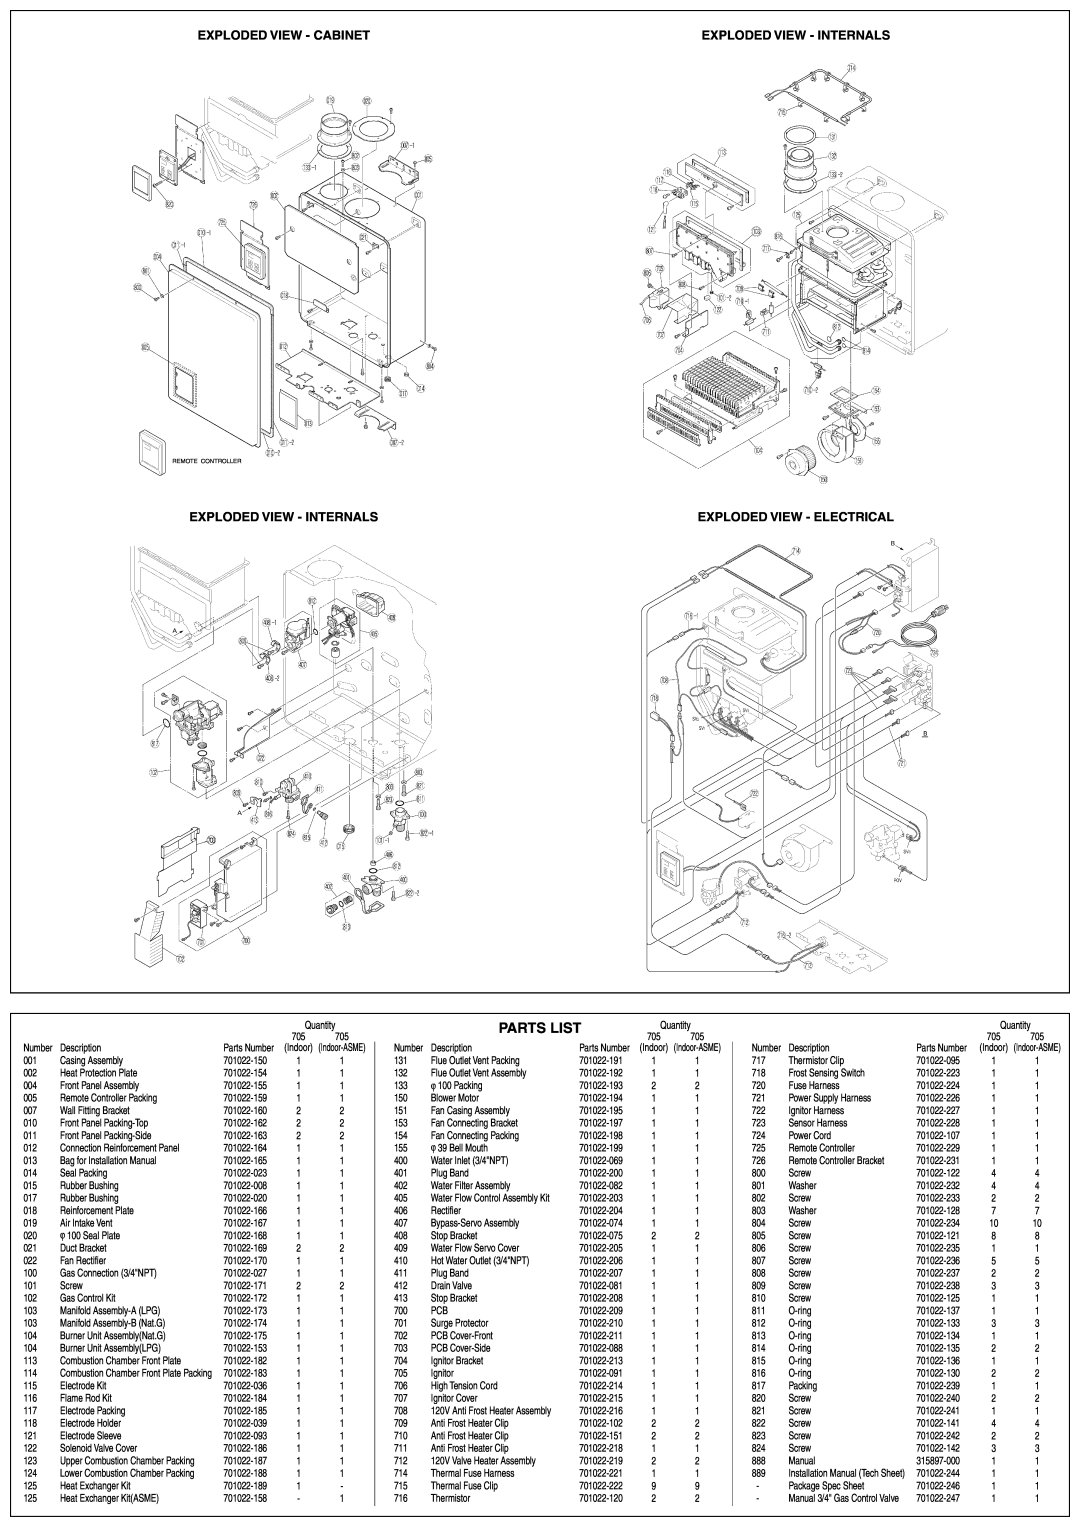 American Water Heater 705 Parts List, Exploded View - Cabinet, Exploded View - Internals, Exploded View - Electrical 